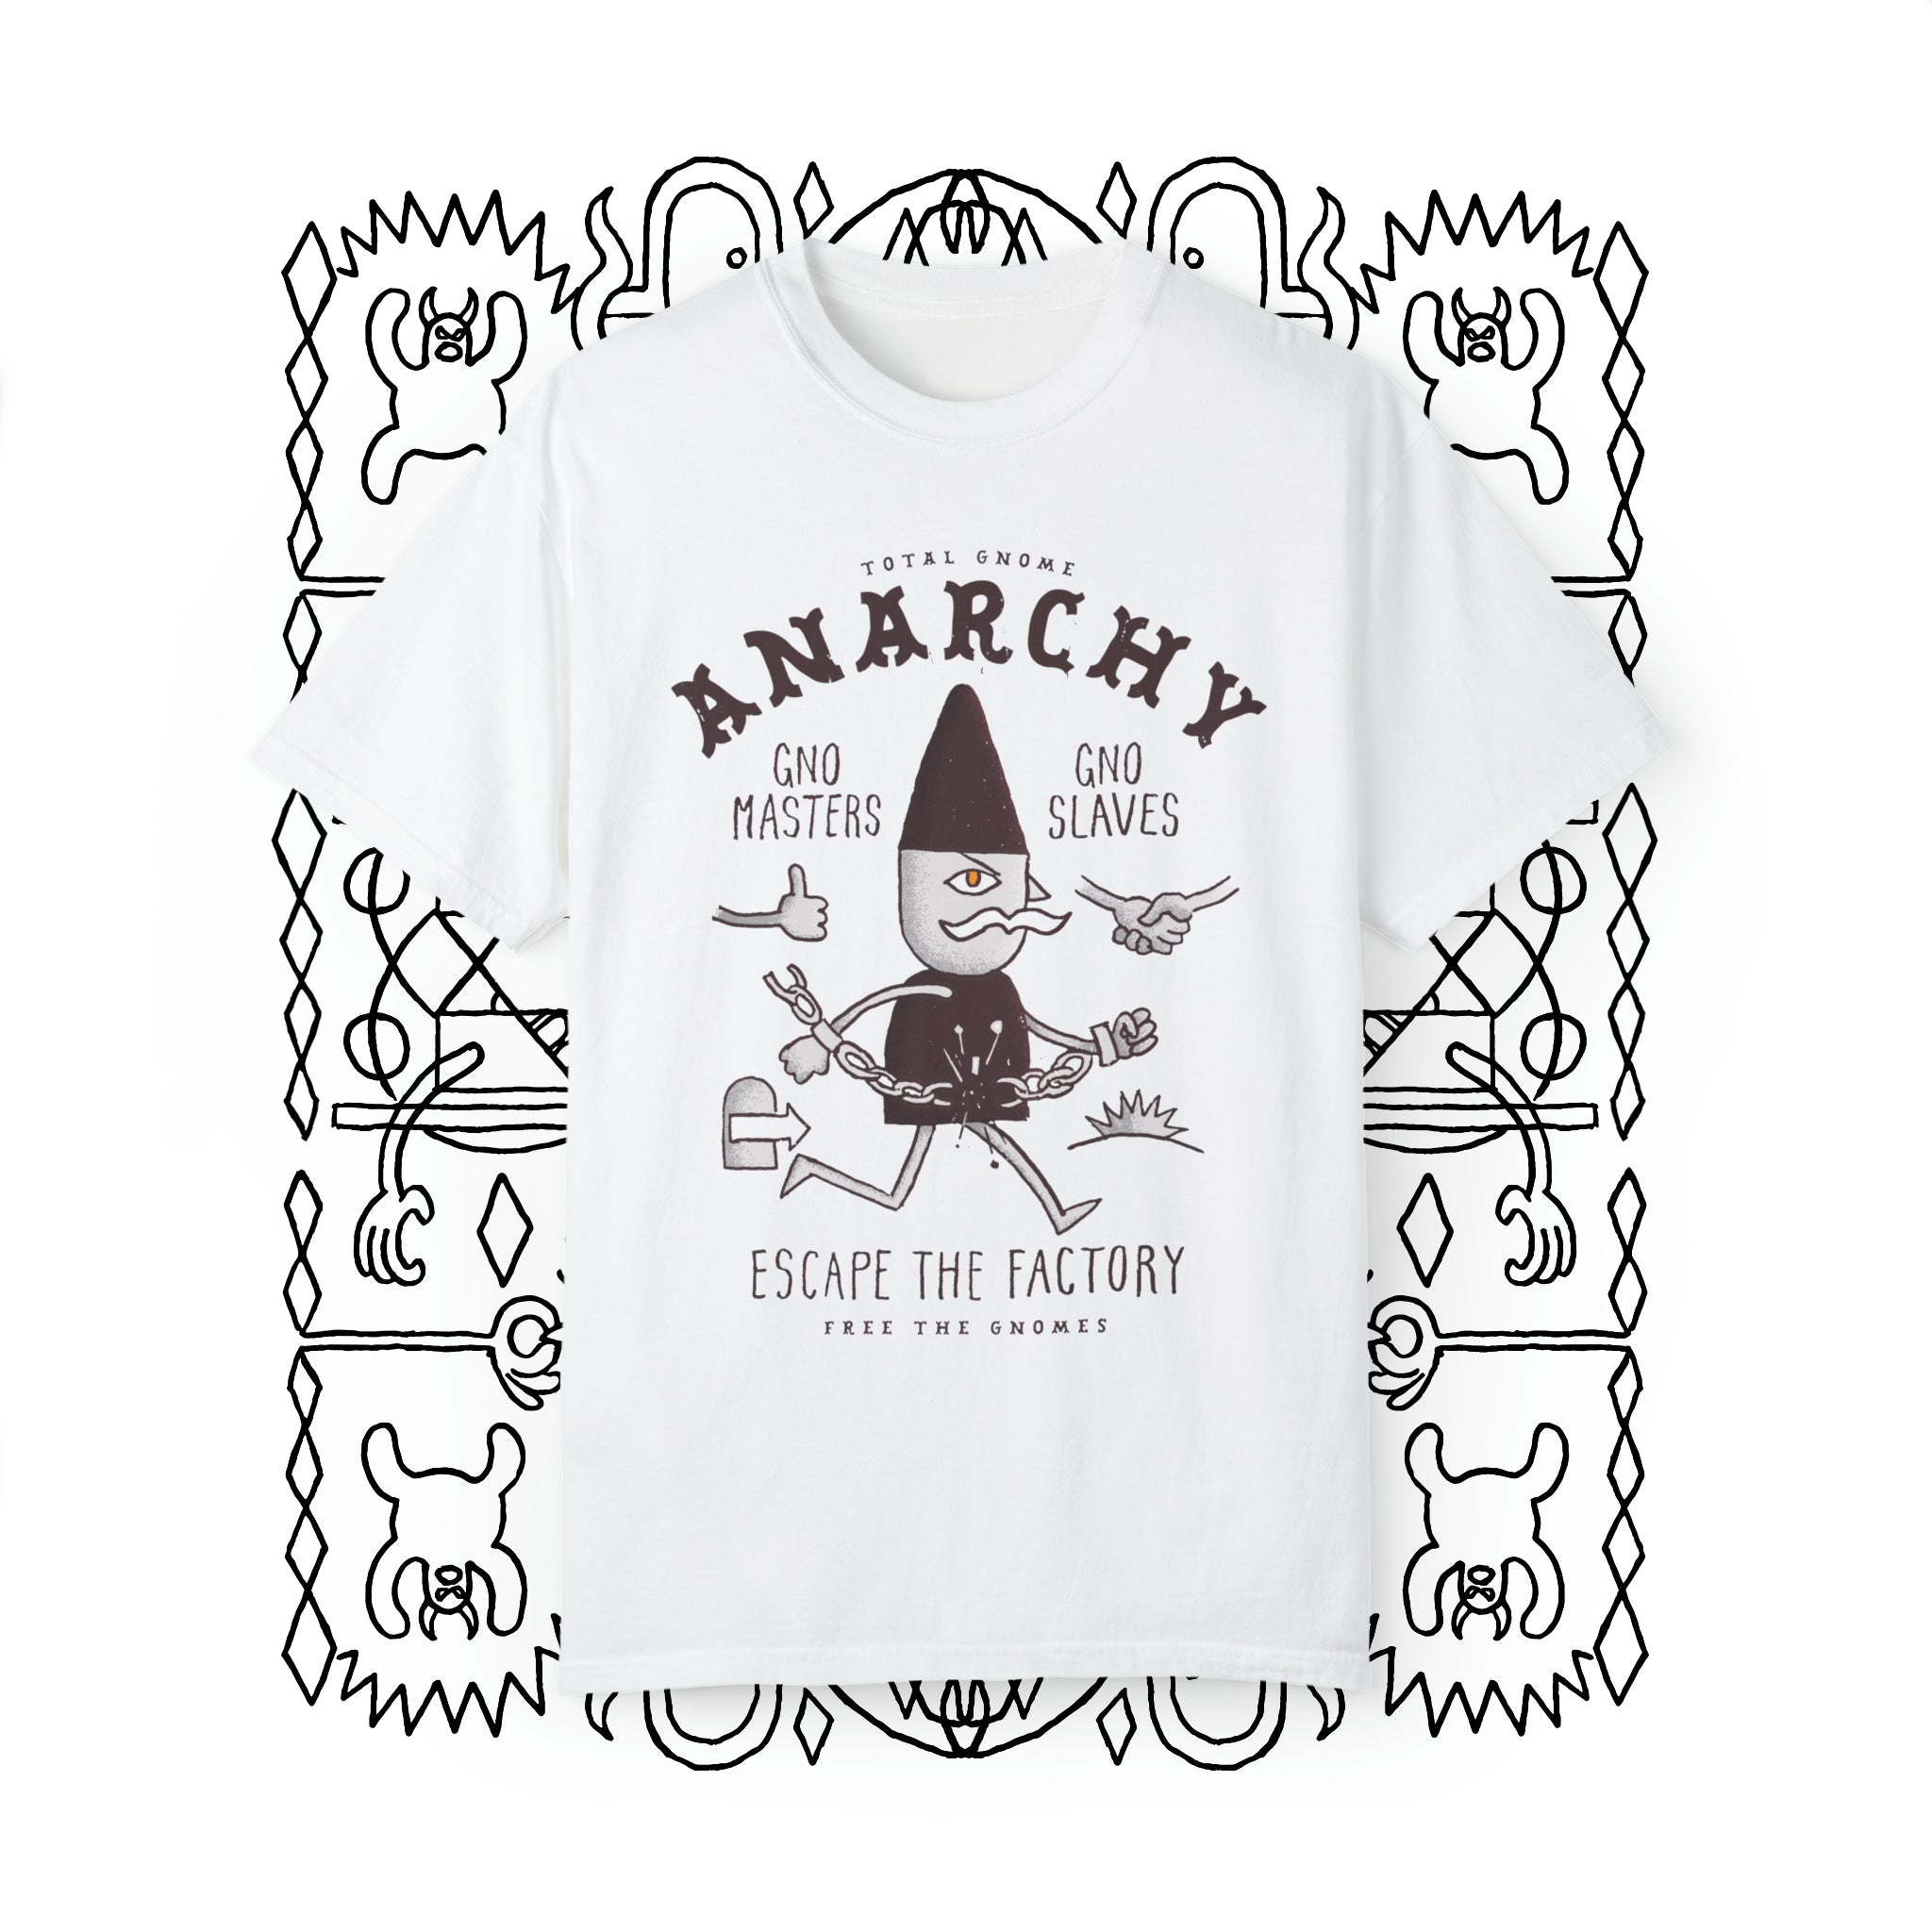 Total Gnome Anarchy | Comfort Colors Premium T-shirt - T-Shirt - Ace of Gnomes - 34027845118556678530